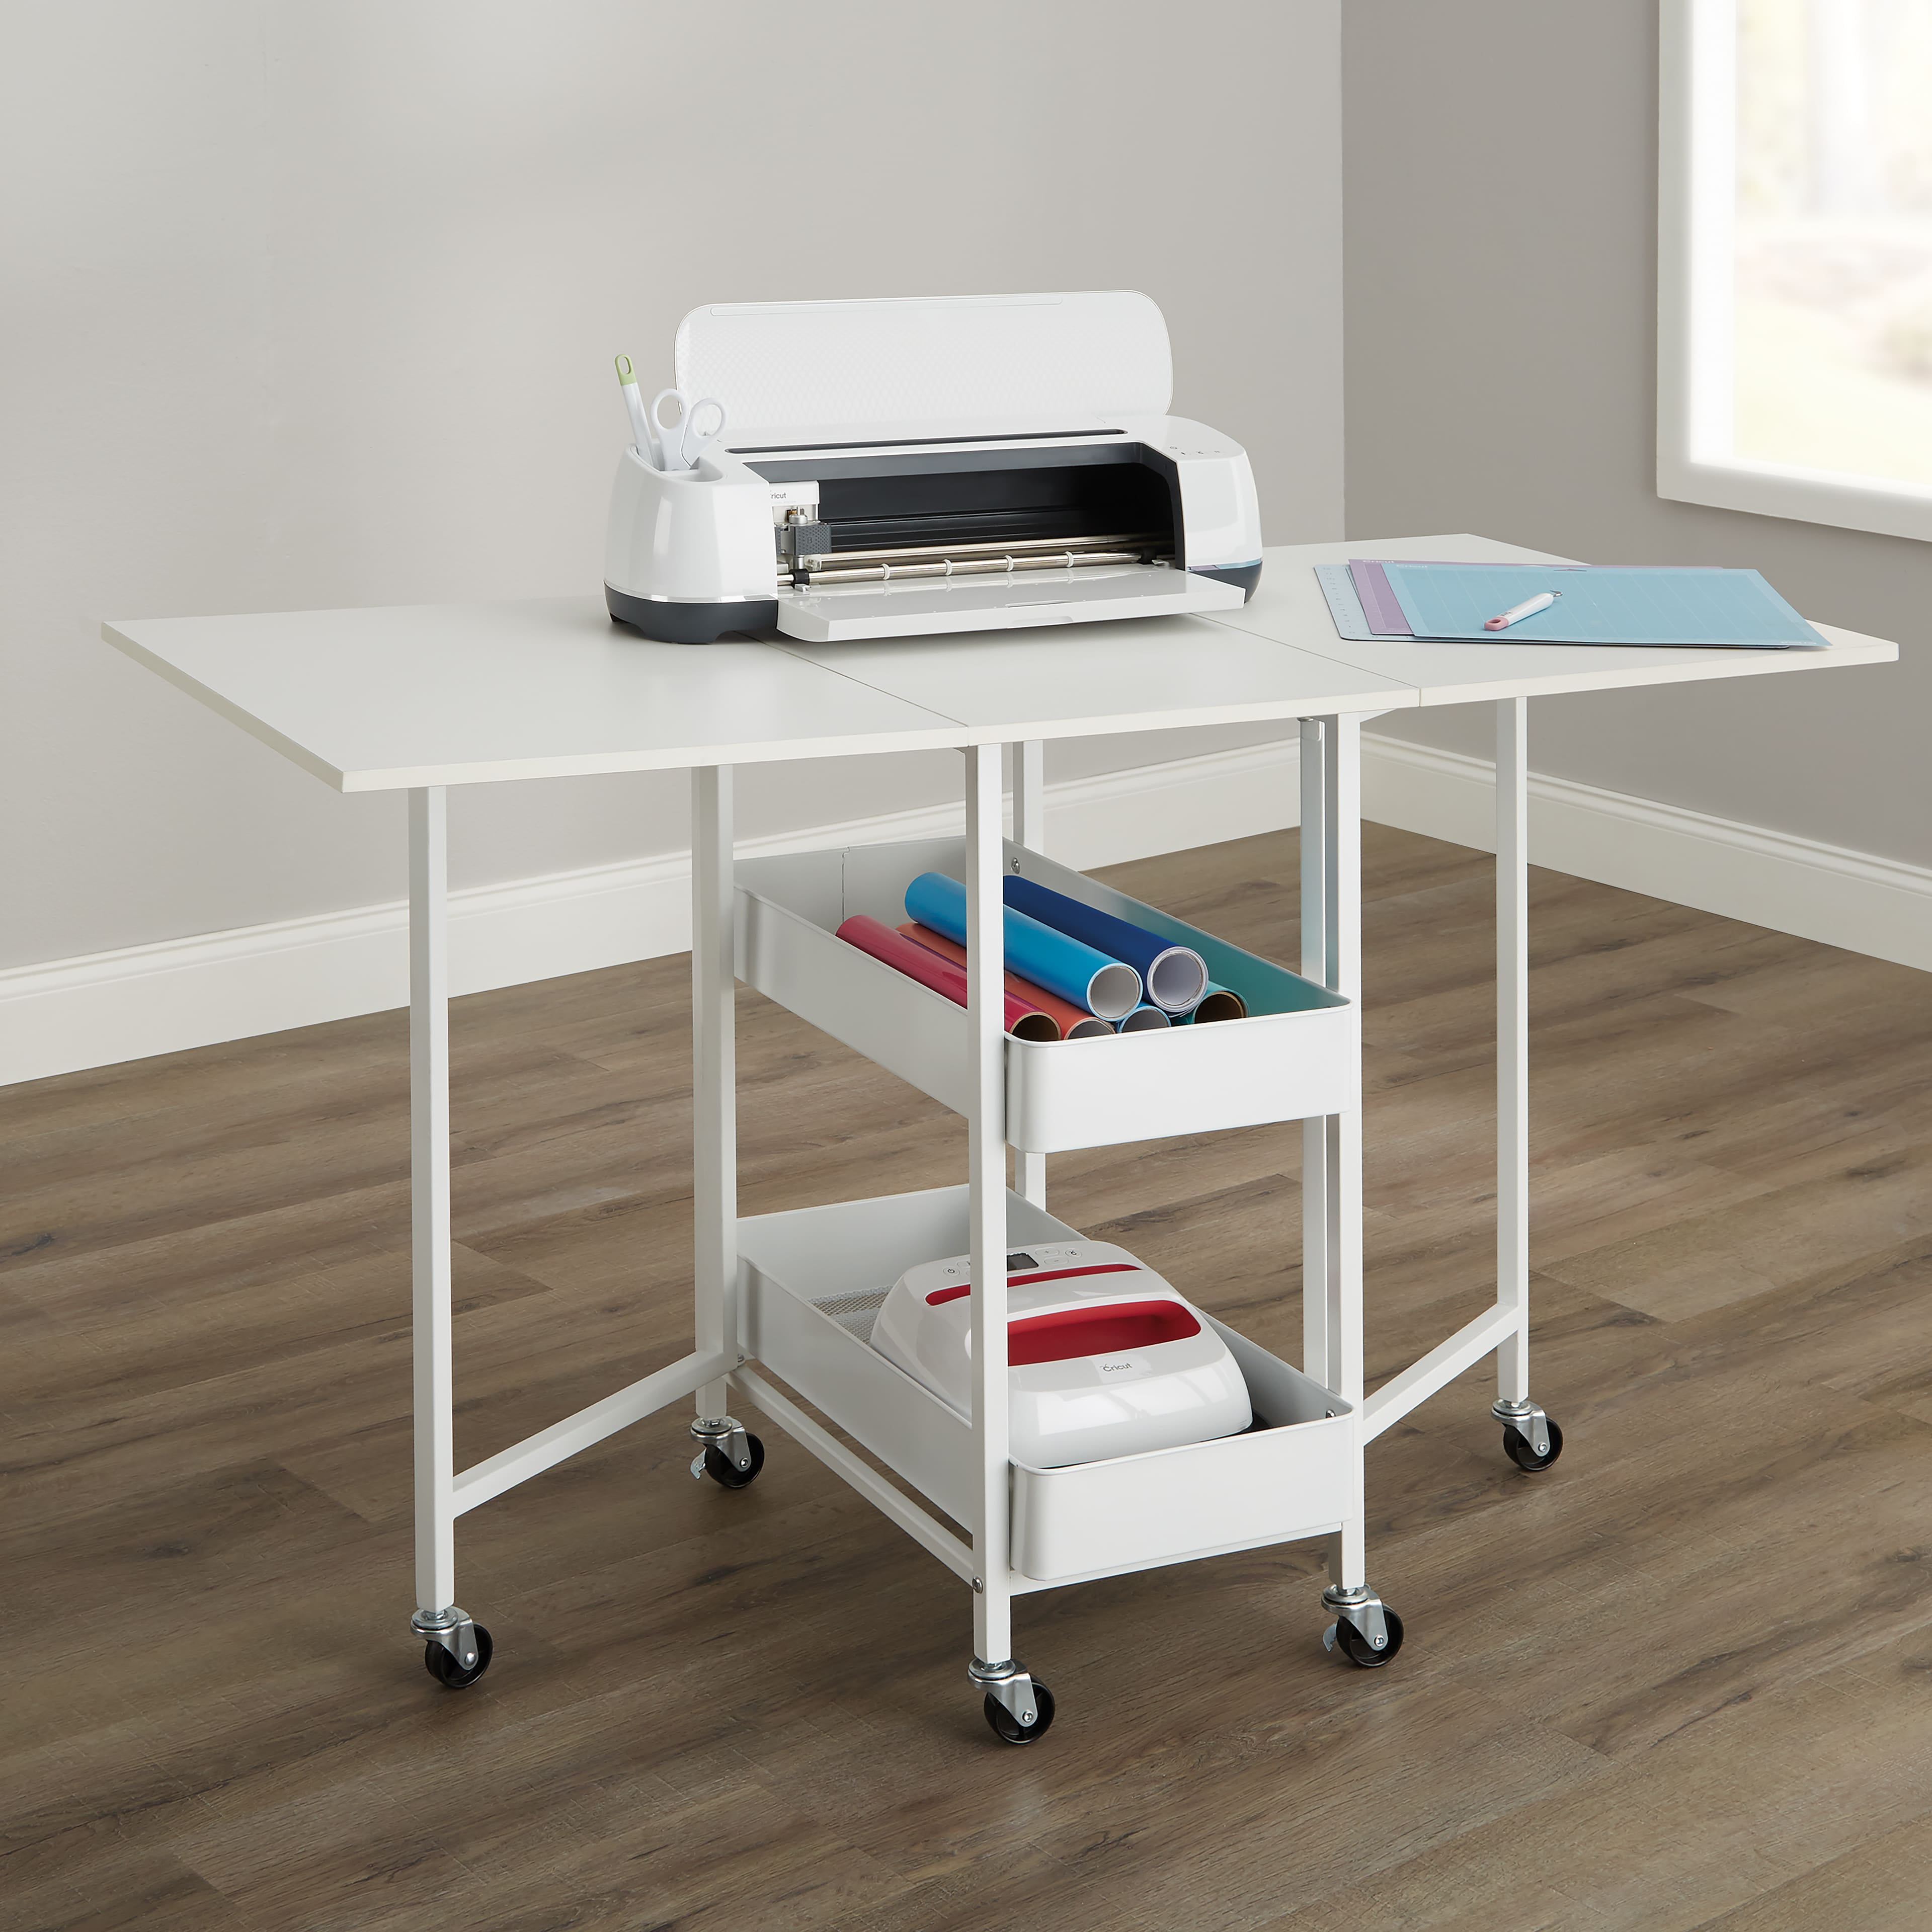 Kensington White Table Rolling Cart and Extendable Panels by Simply Tidy -  Multi-Functional Storage Cart for Home, Office, and Kitchen - 1 Pack 